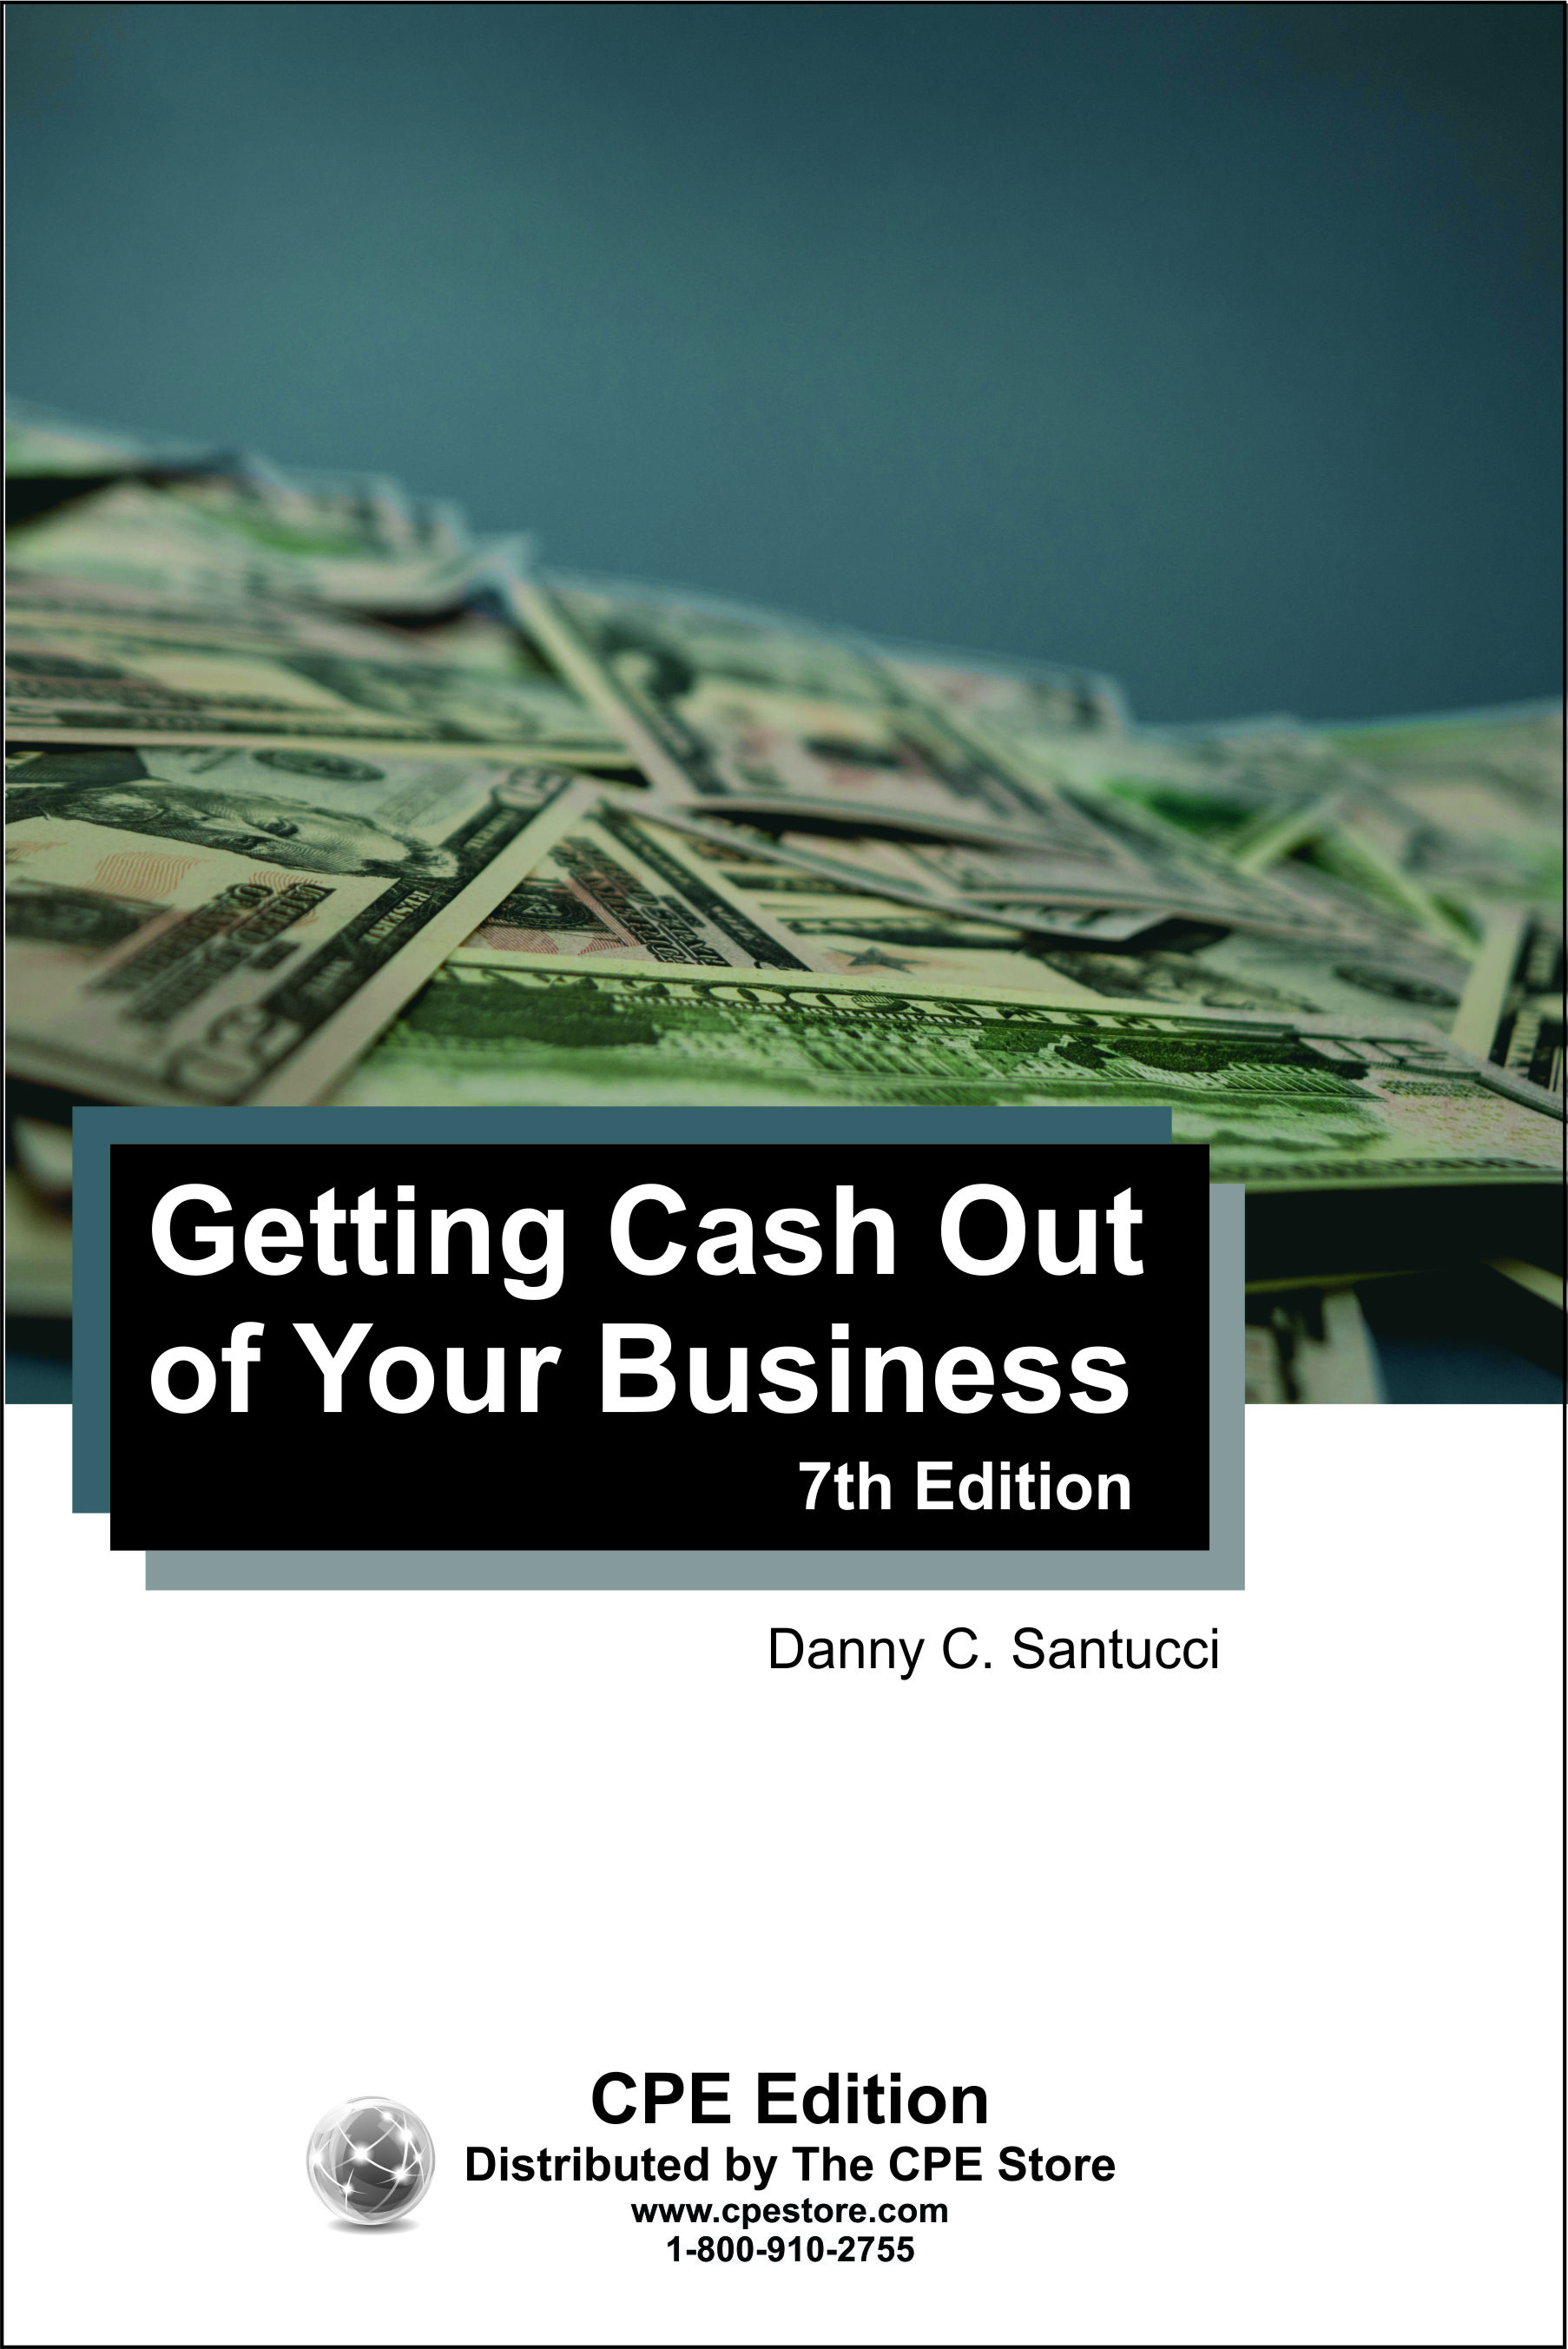 Getting Cash Out of Your Business